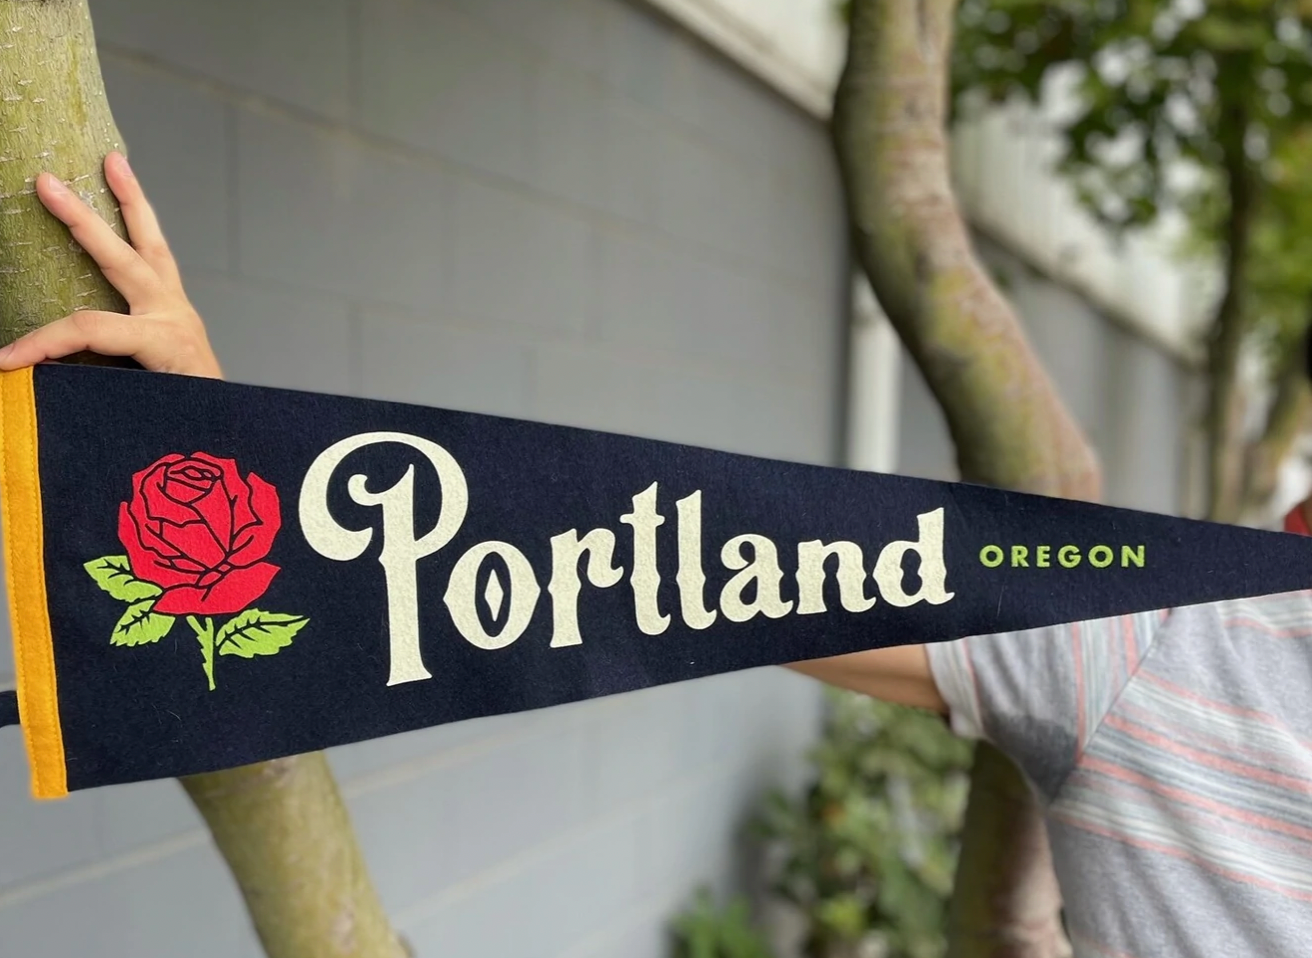 Navy blue pennant flag with a red rose that says "Portland" white in scrawled font and "Oregon" in small green letters.